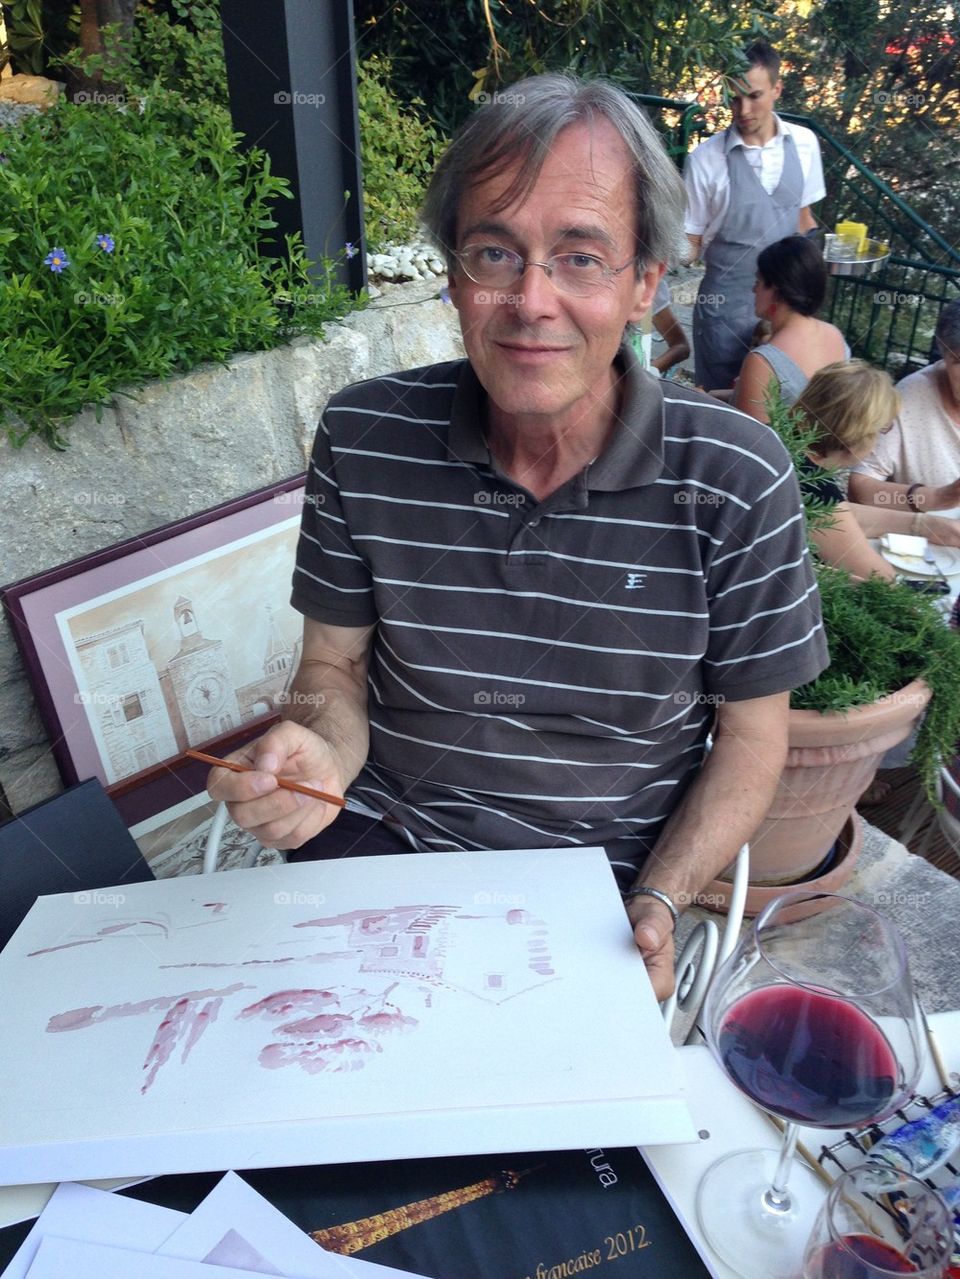 Painting with wine